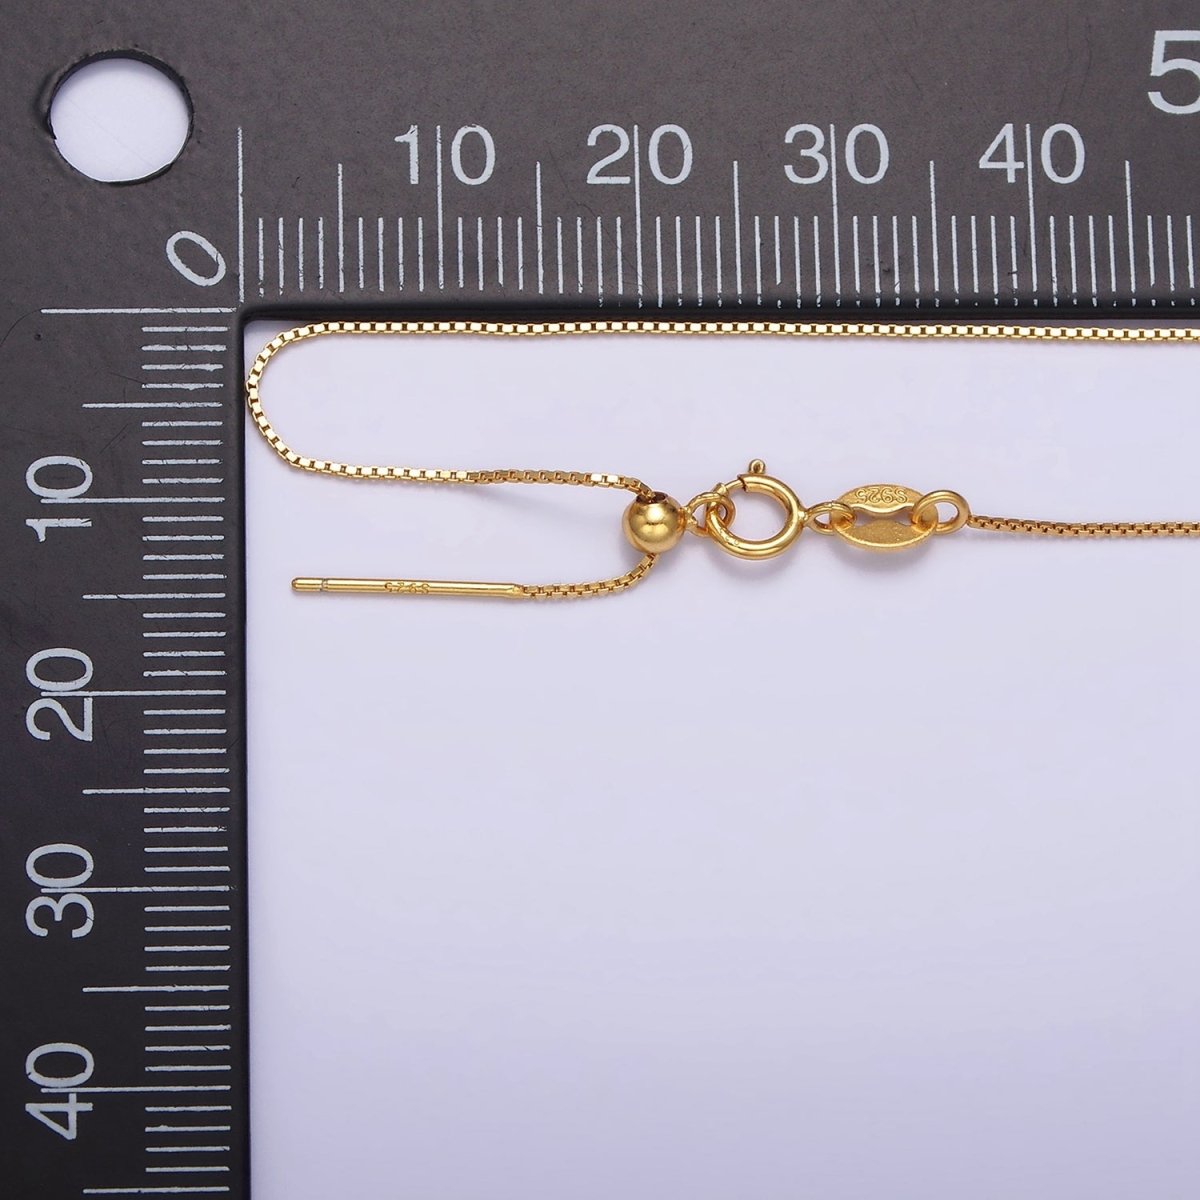 Dainty 24K Gold Vermeil Box Chain Necklace 925 Sterling Silver Necklace Chain w/ Heavy 24K Gold Plated 18 inch | WA-1960 Clearance Pricing - DLUXCA